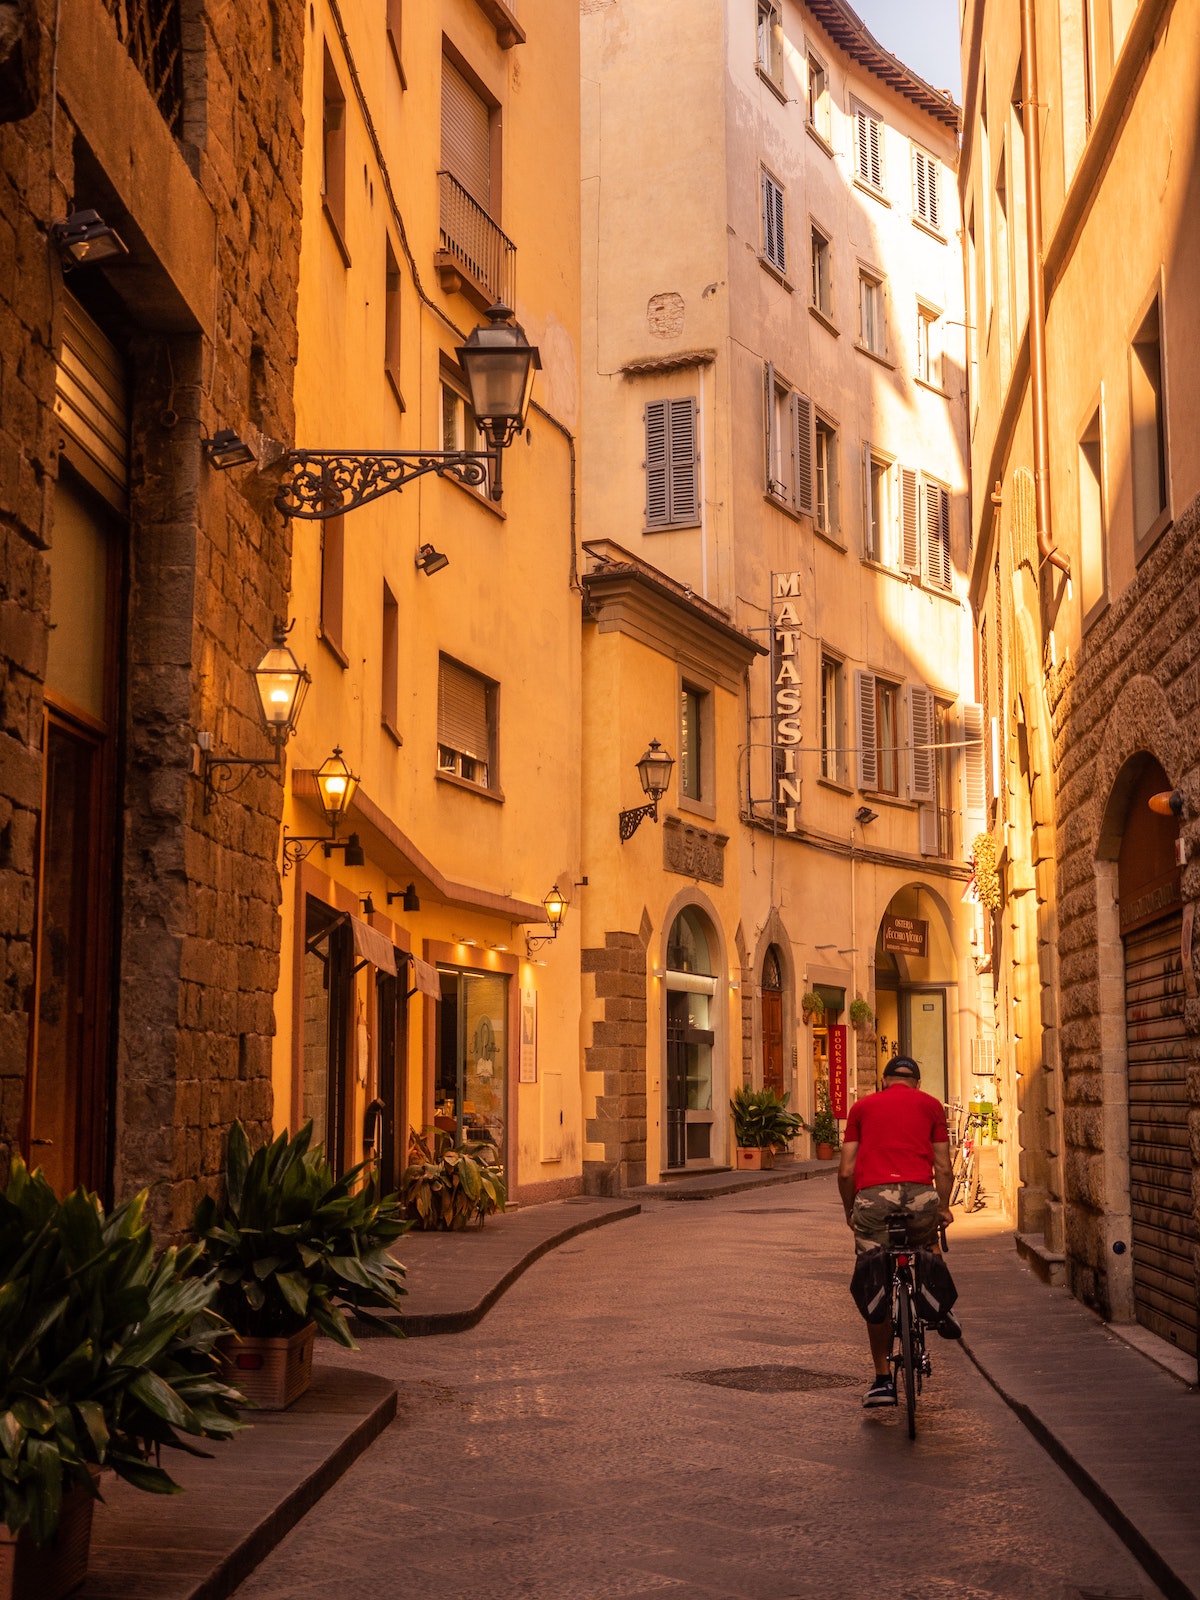 A person in a red jacket riding a bike on a pedestrian street in Florence